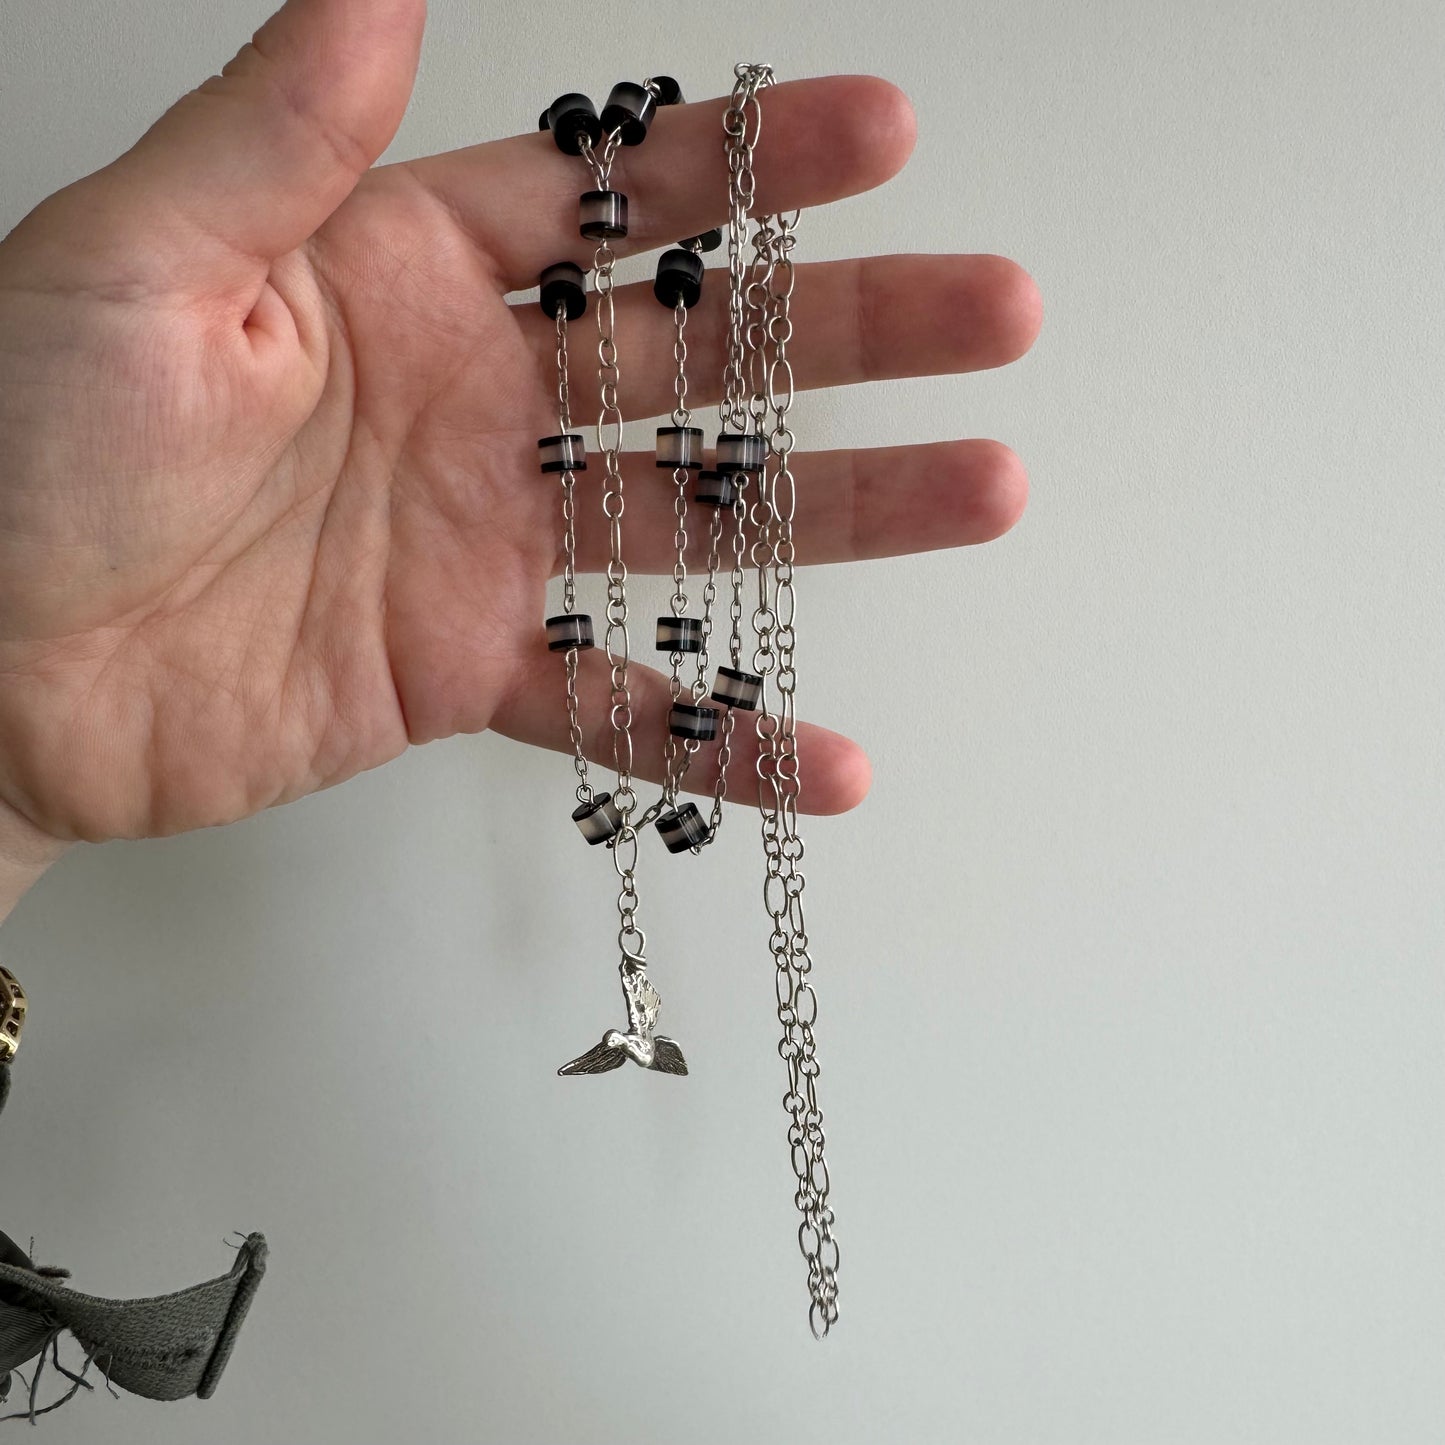 reimagined V I N T A G E // peace prayers / sterling silver and glass rosary style long chain / a necklace